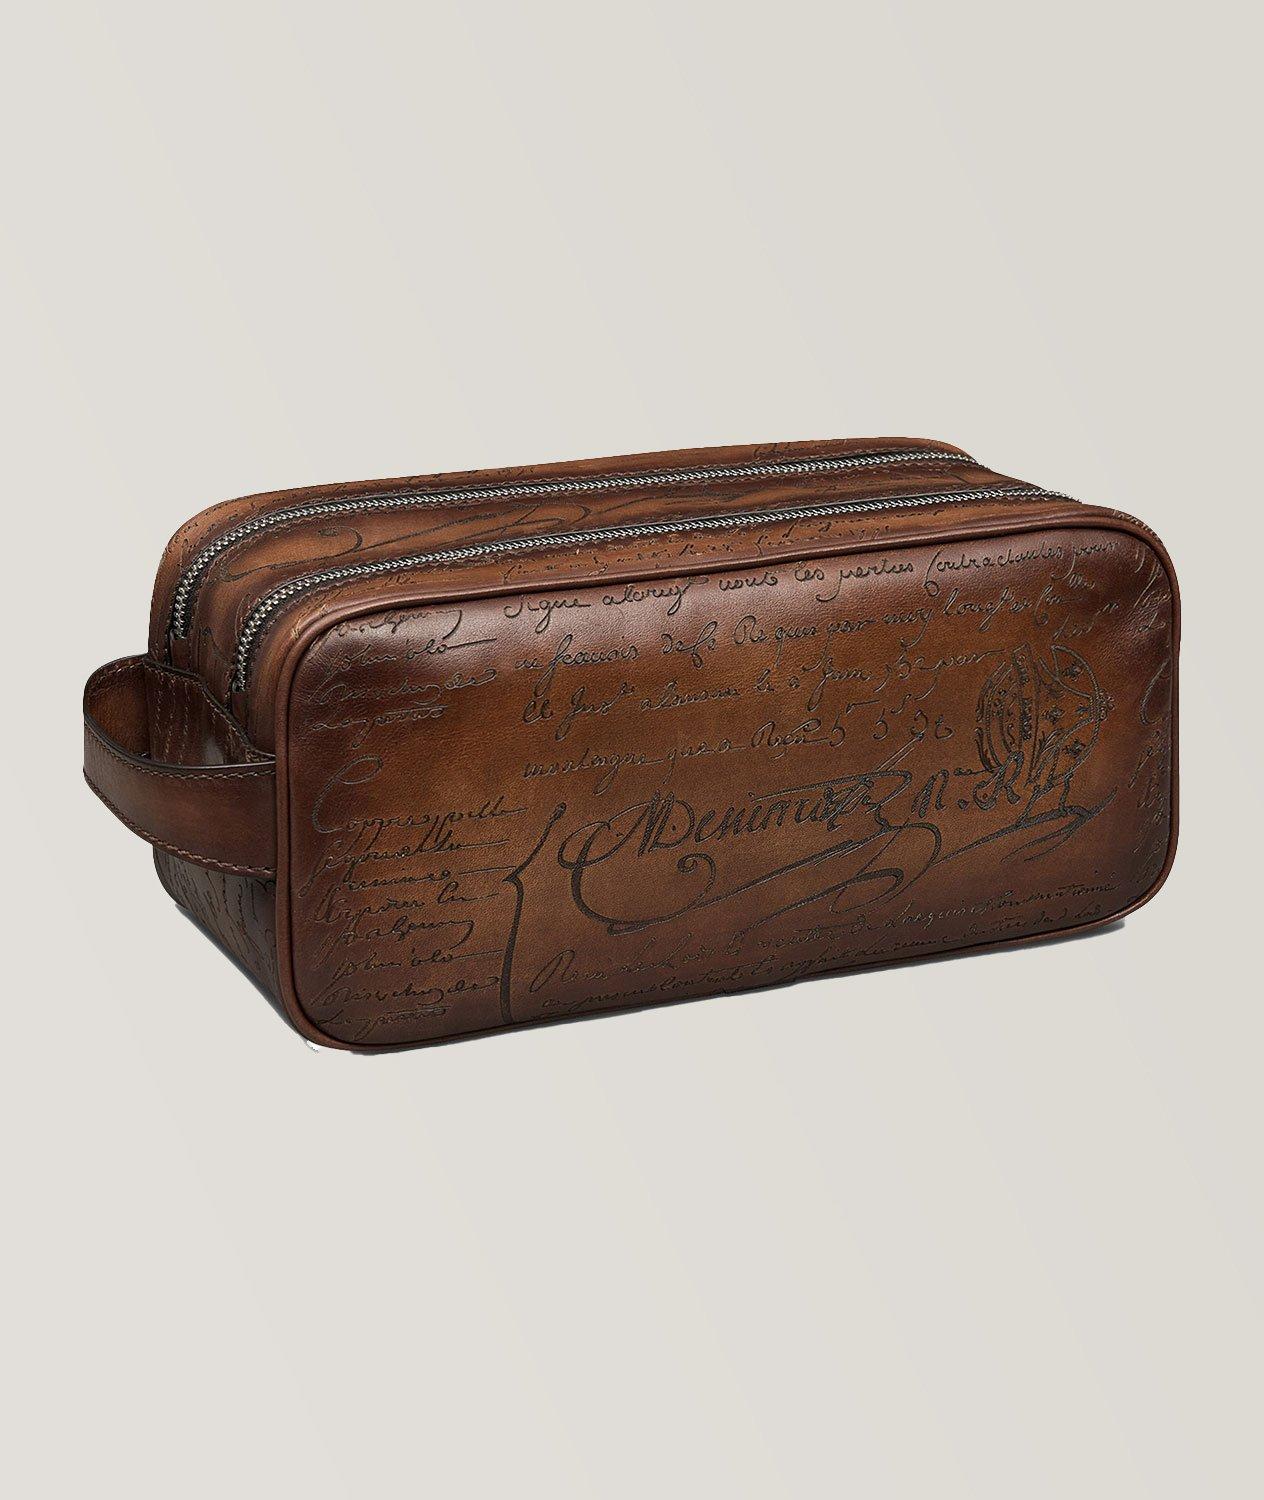 Formula Scritto Leather Toiletry Bag image 1